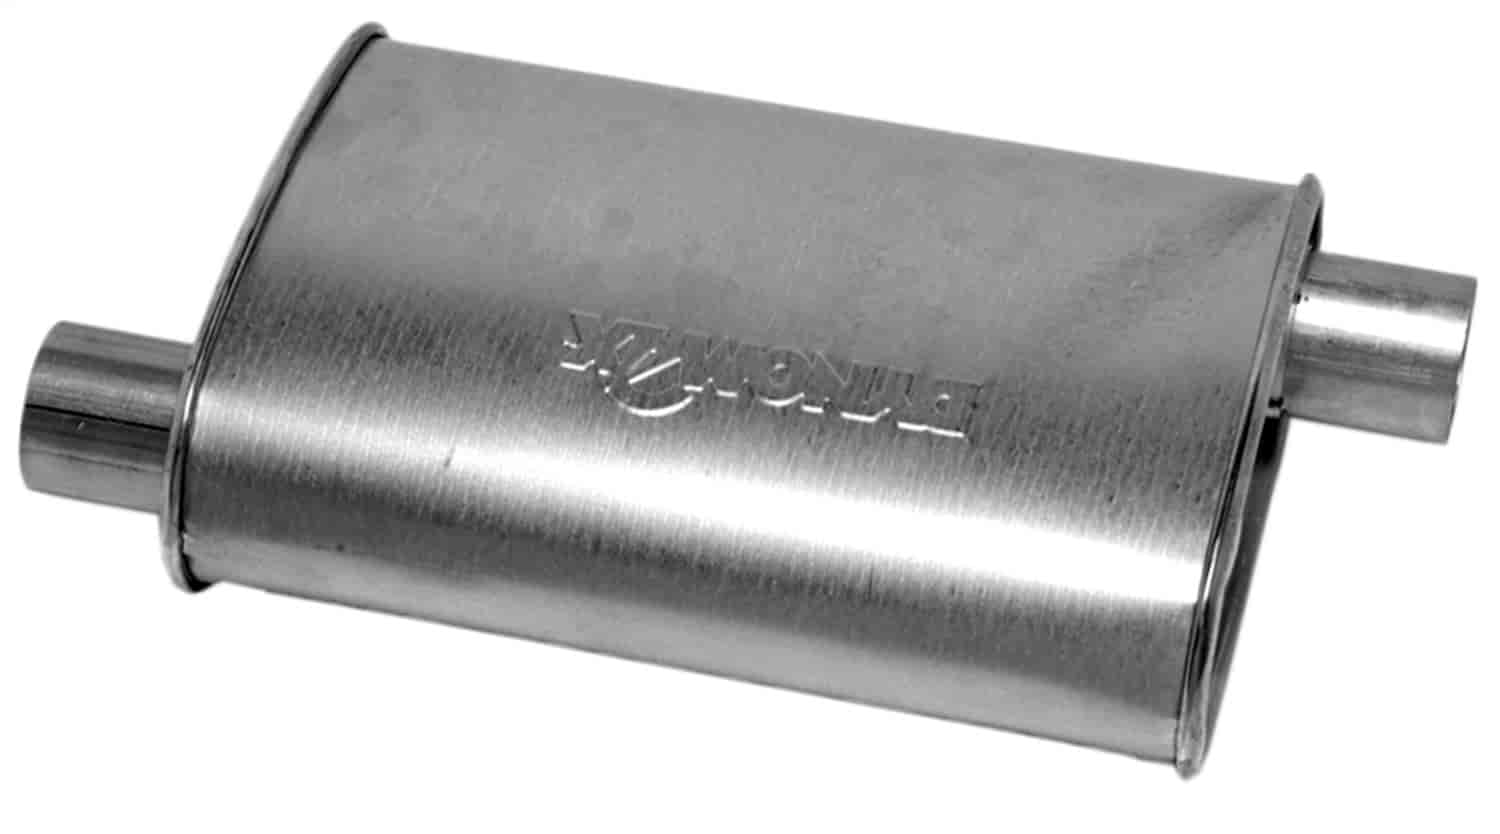 Super Turbo Muffler In/Out: 2.5"